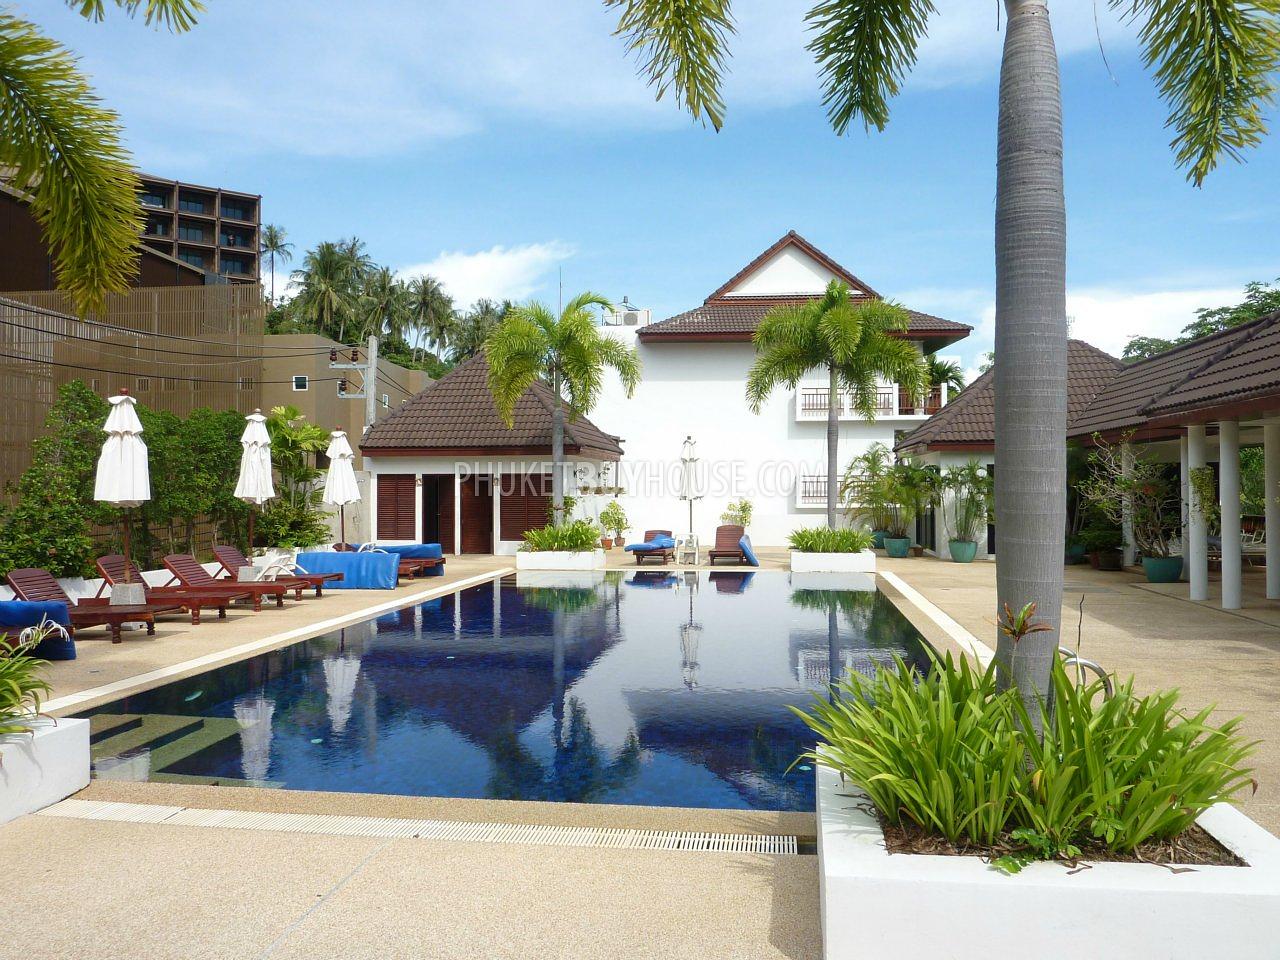 NAI2456: Freehold: Very nice 2 bedr. apartment (top floor), fully furnished, near beautiful Nai Harn Beach. Фото #6